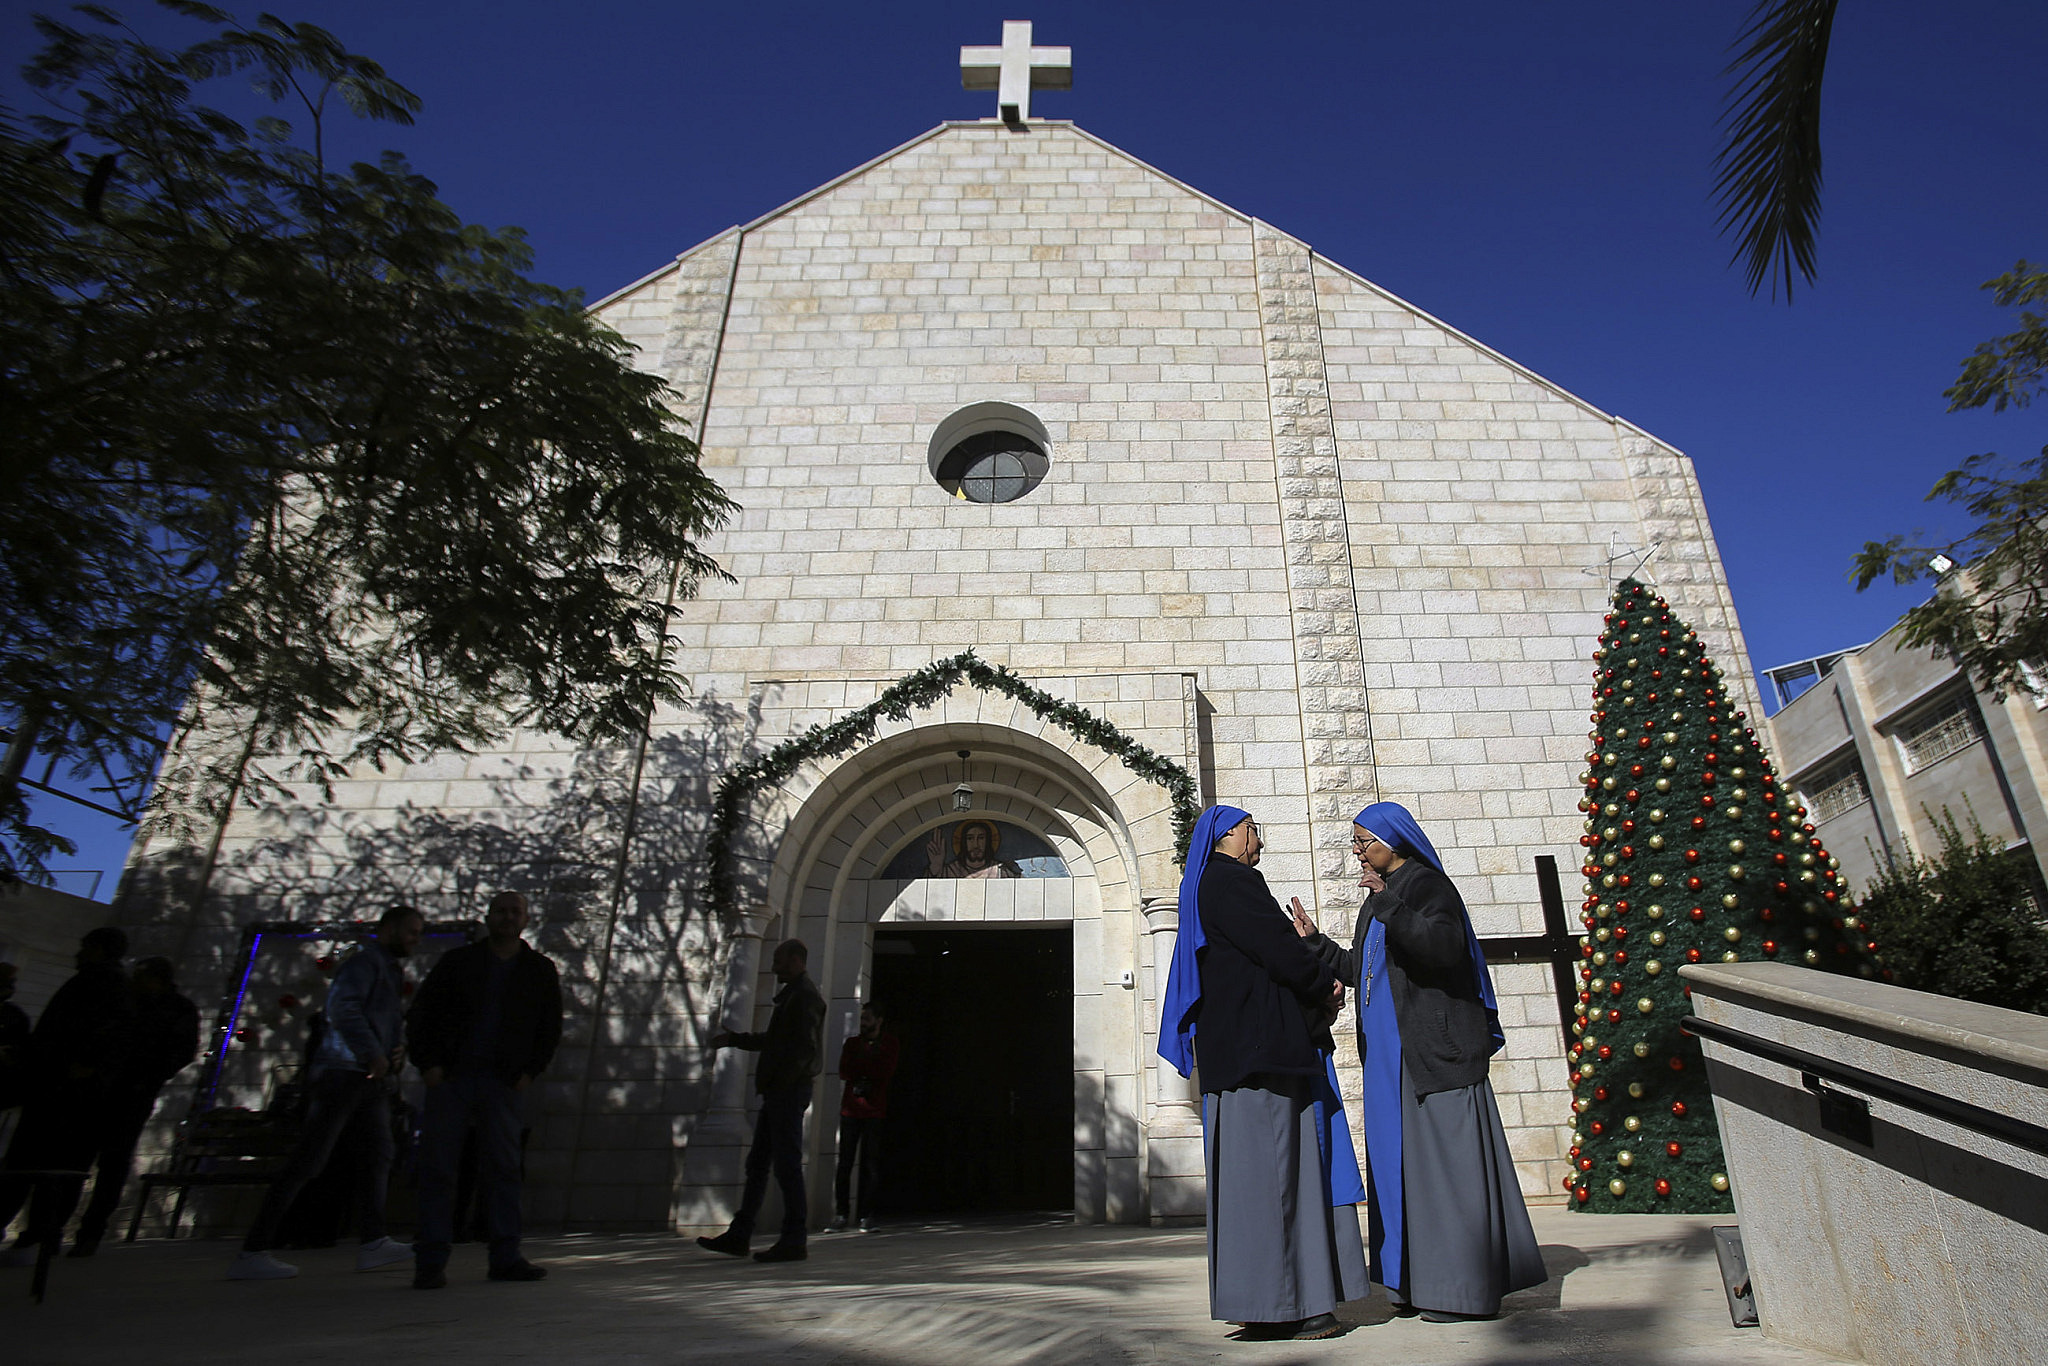 Apostolic Administrator of the Latin Church in the Holy land Pierbattista Pizzaballa, leads a mass to Gaza Strip Palestinian Christian worshipers in the Roman Catholic Holy Family Church during the start of the Christmas holiday, in Gaza City, December 19, 2021. (Atia Mohammed/Flash90)